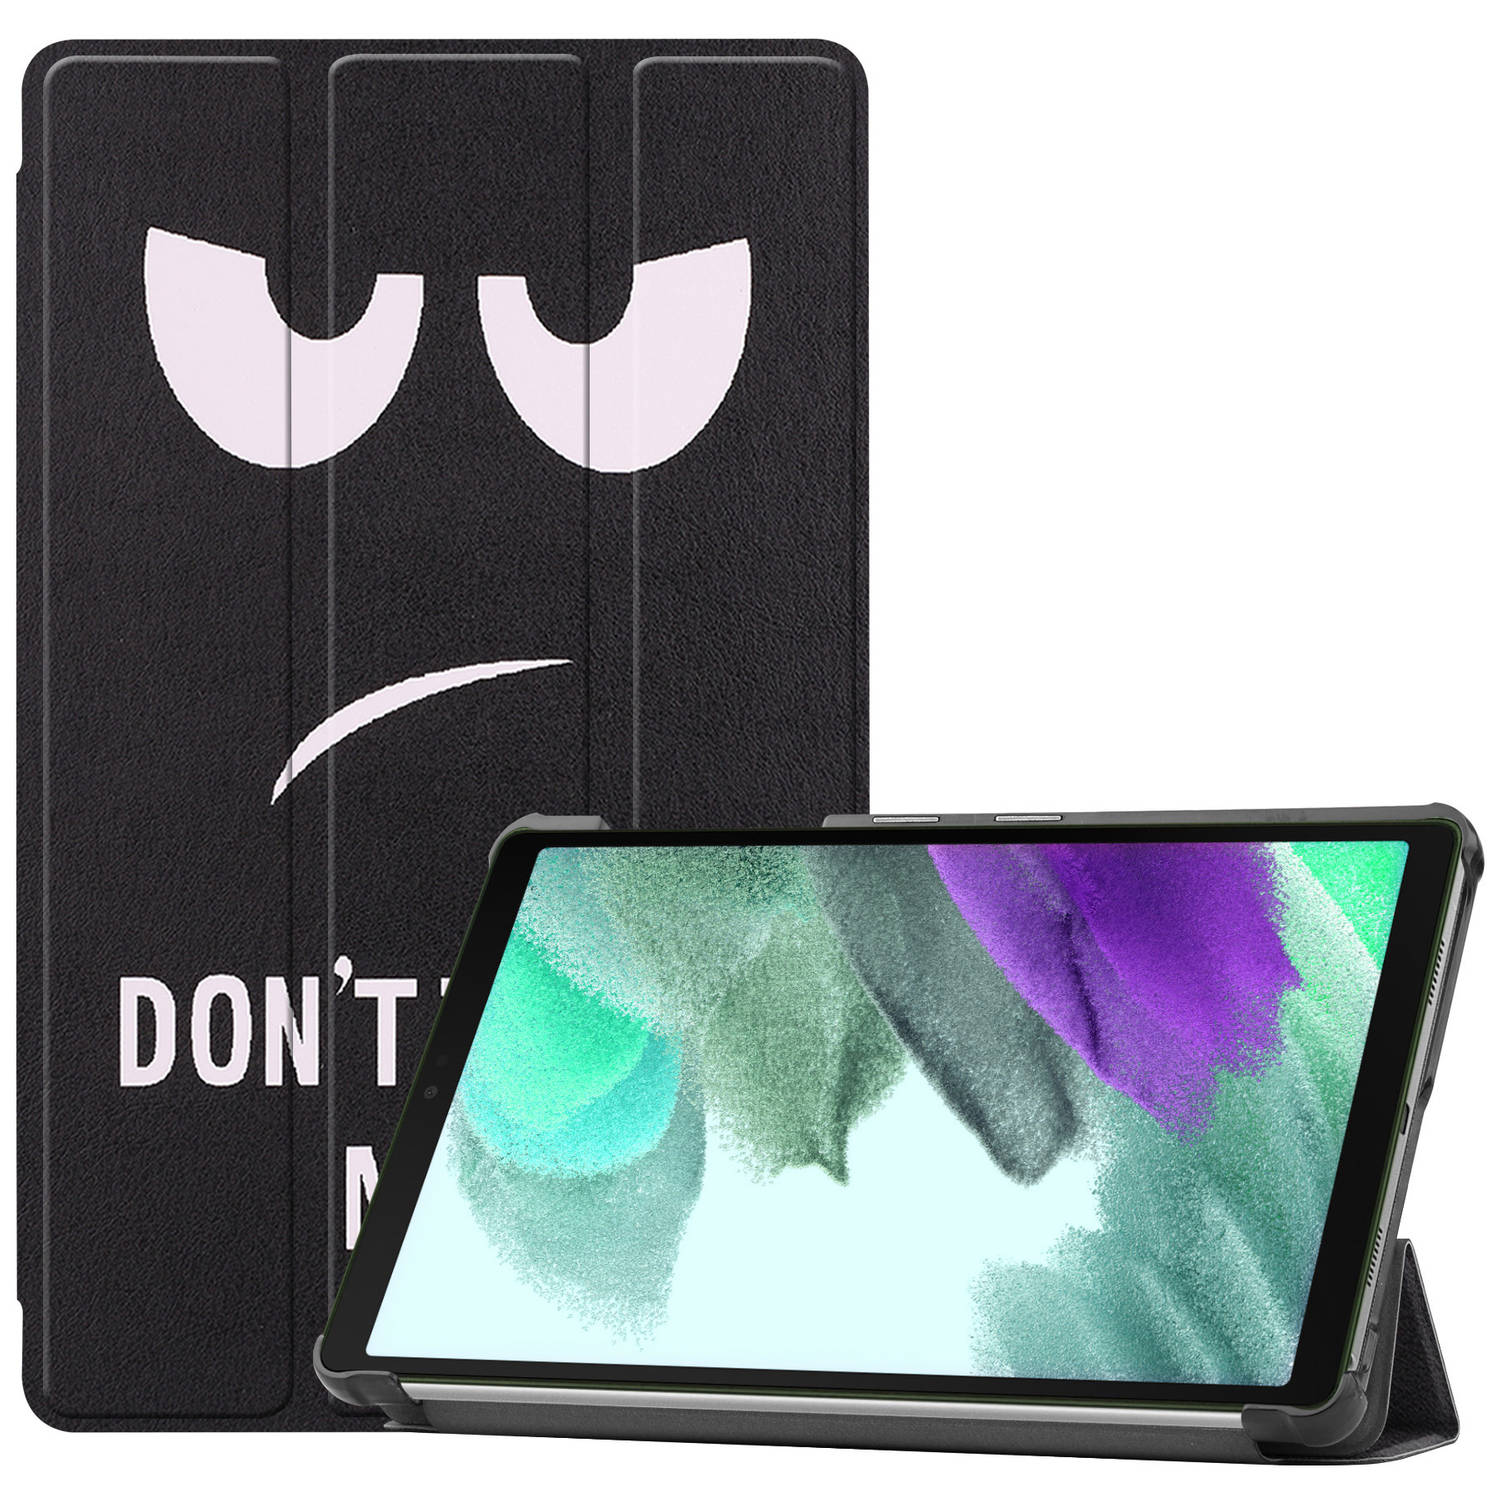 Samsung Tab S6 Lite Hoes Book Case Hoesje Don't Touch Me - Samsung Galaxy Tab S6 Lite Hoesje Hard Cover - Samsung Tab S6 Lite Hoes Don't Touch Me